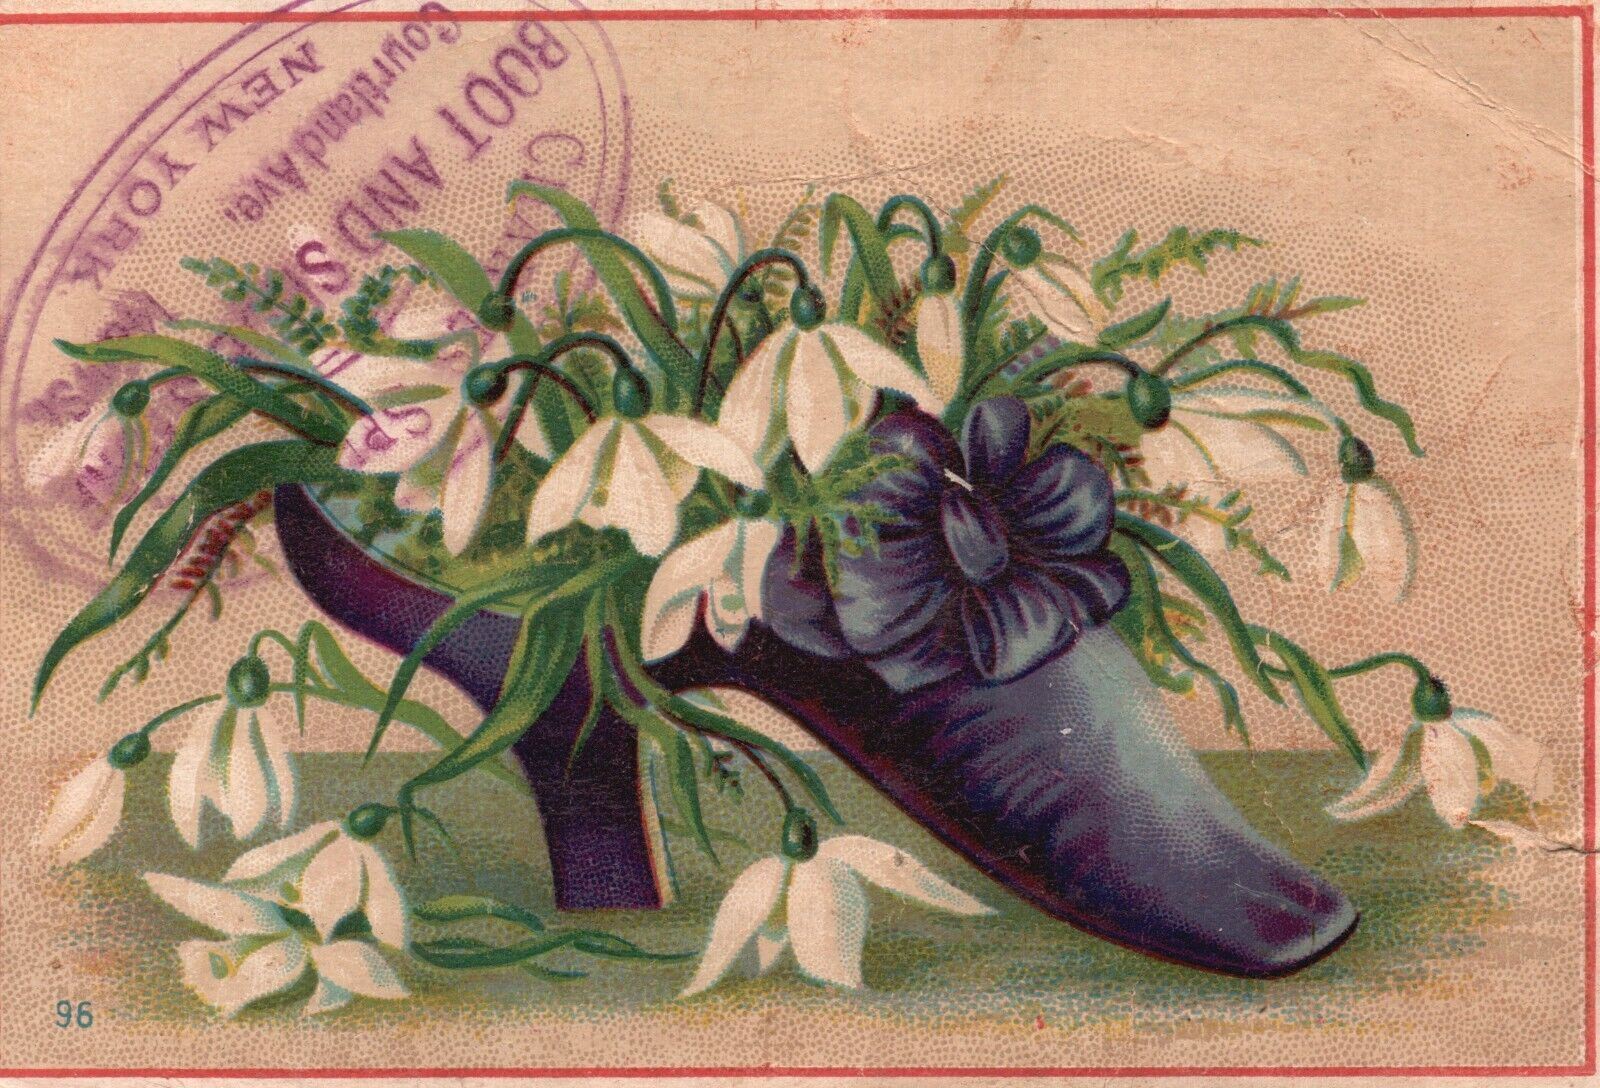 1880s-90s High Heel Blue Shoe White Flowers Charles Spil Boot & Shoes Trade Card